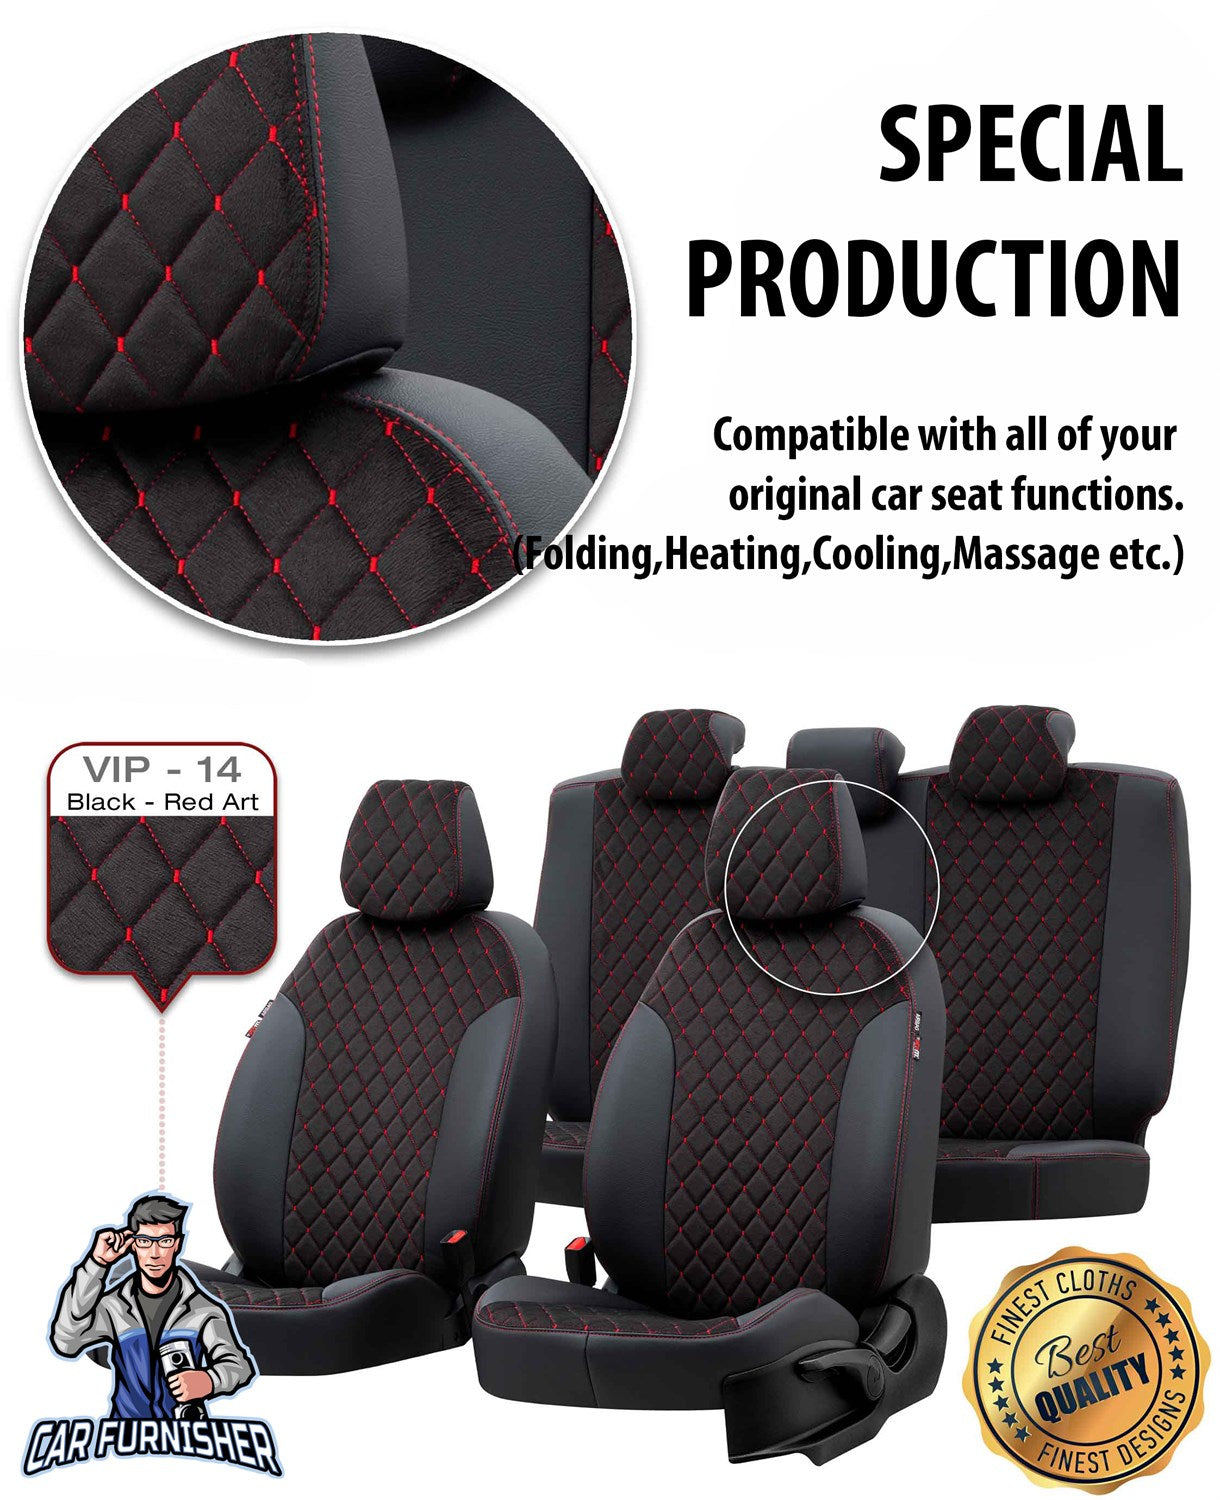 Tata Xenon Seat Covers Madrid Foal Feather Design Dark Gray Leather & Foal Feather